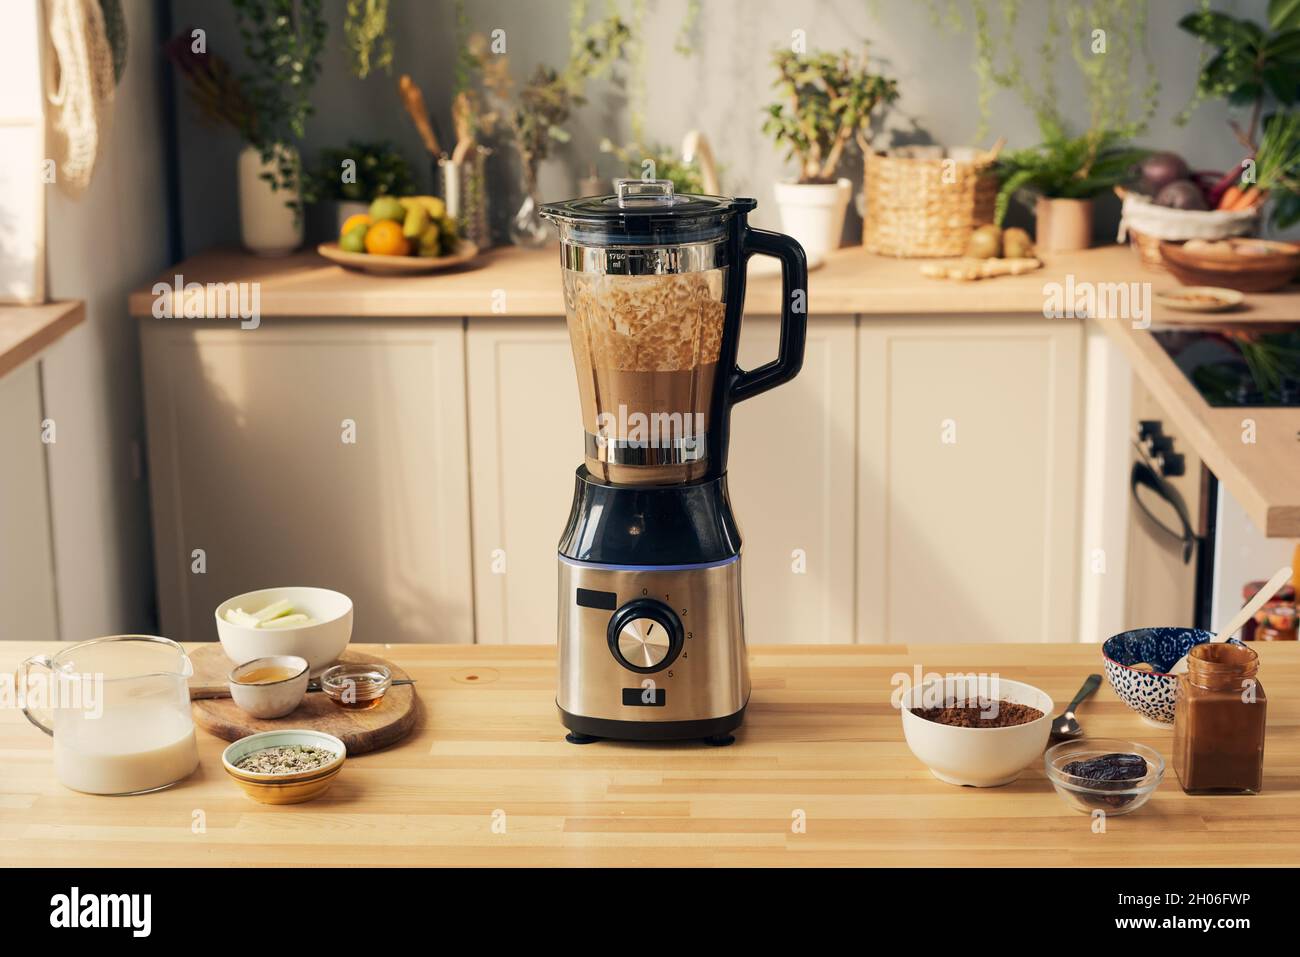 https://c8.alamy.com/comp/2H06FWP/kitchen-table-with-electric-blender-with-chocolate-smoothie-and-bowls-with-ingredients-2H06FWP.jpg